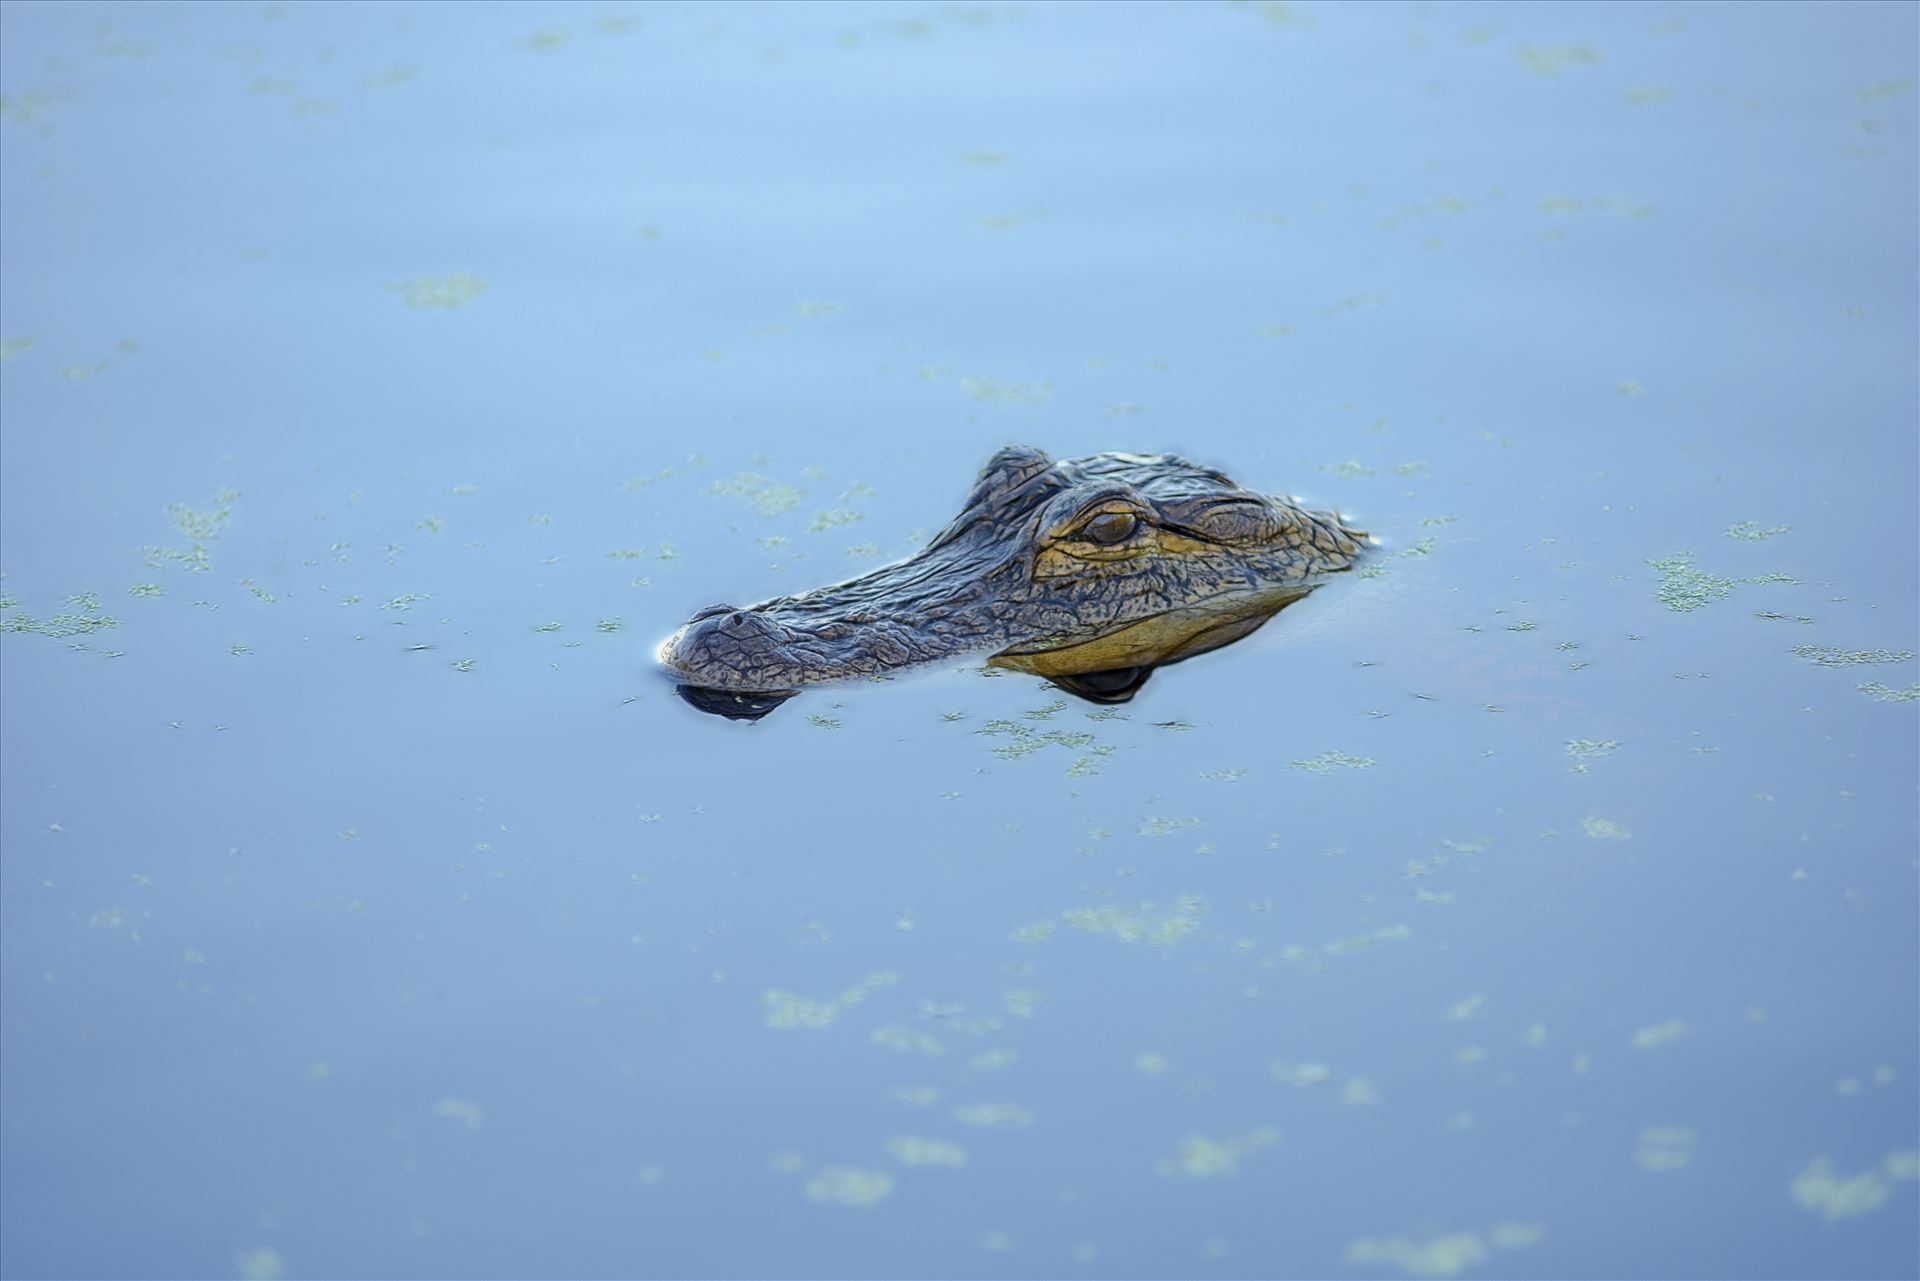 small gator at gator lake st. andrews state park panama city florida RAW3960.jpg -  by Terry Kelly Photography